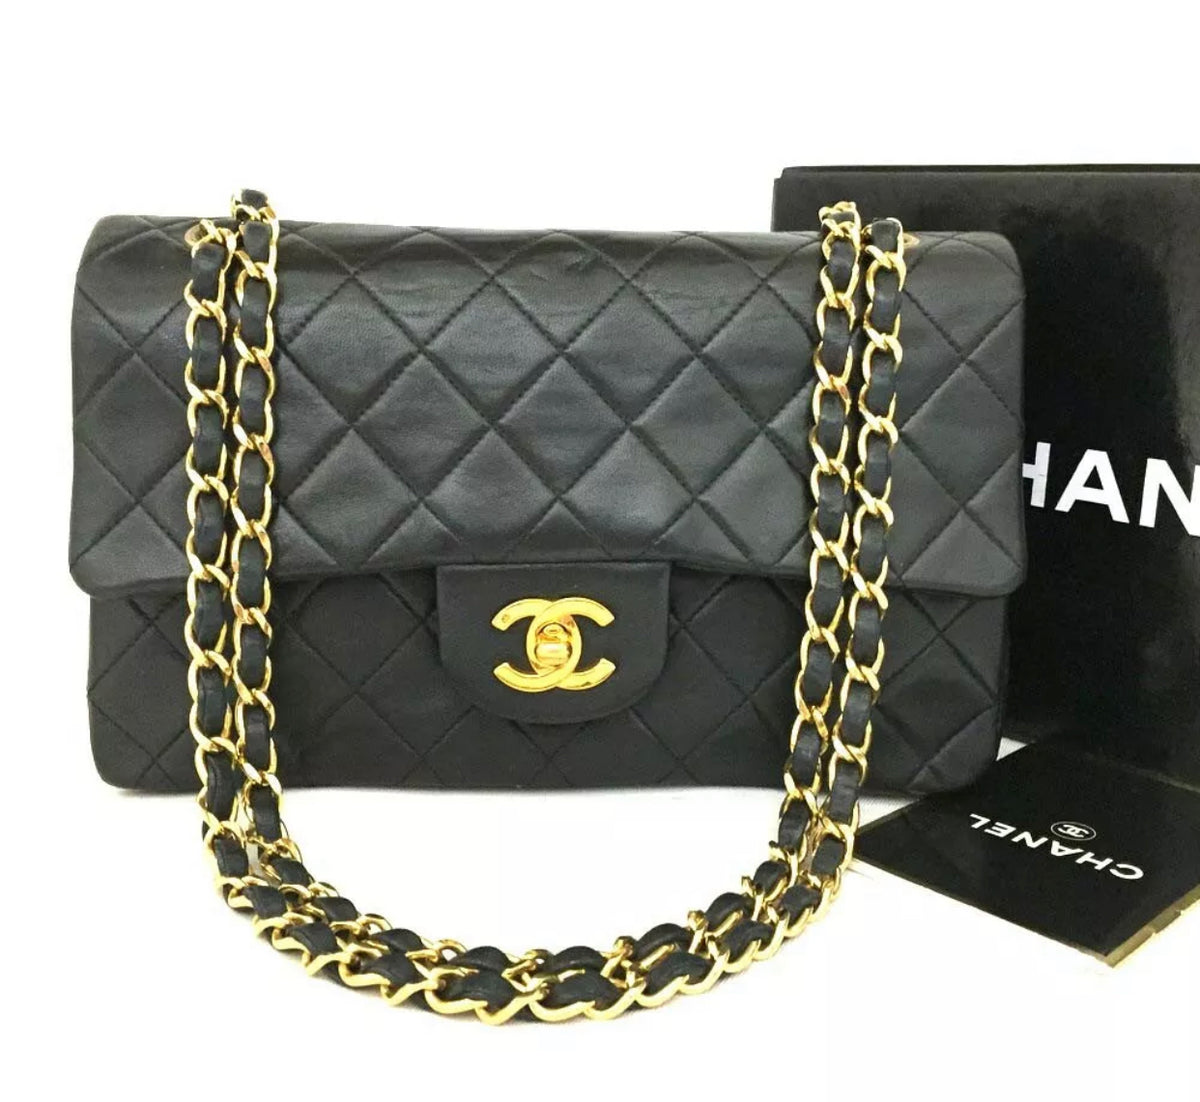 chanel price increase over the years